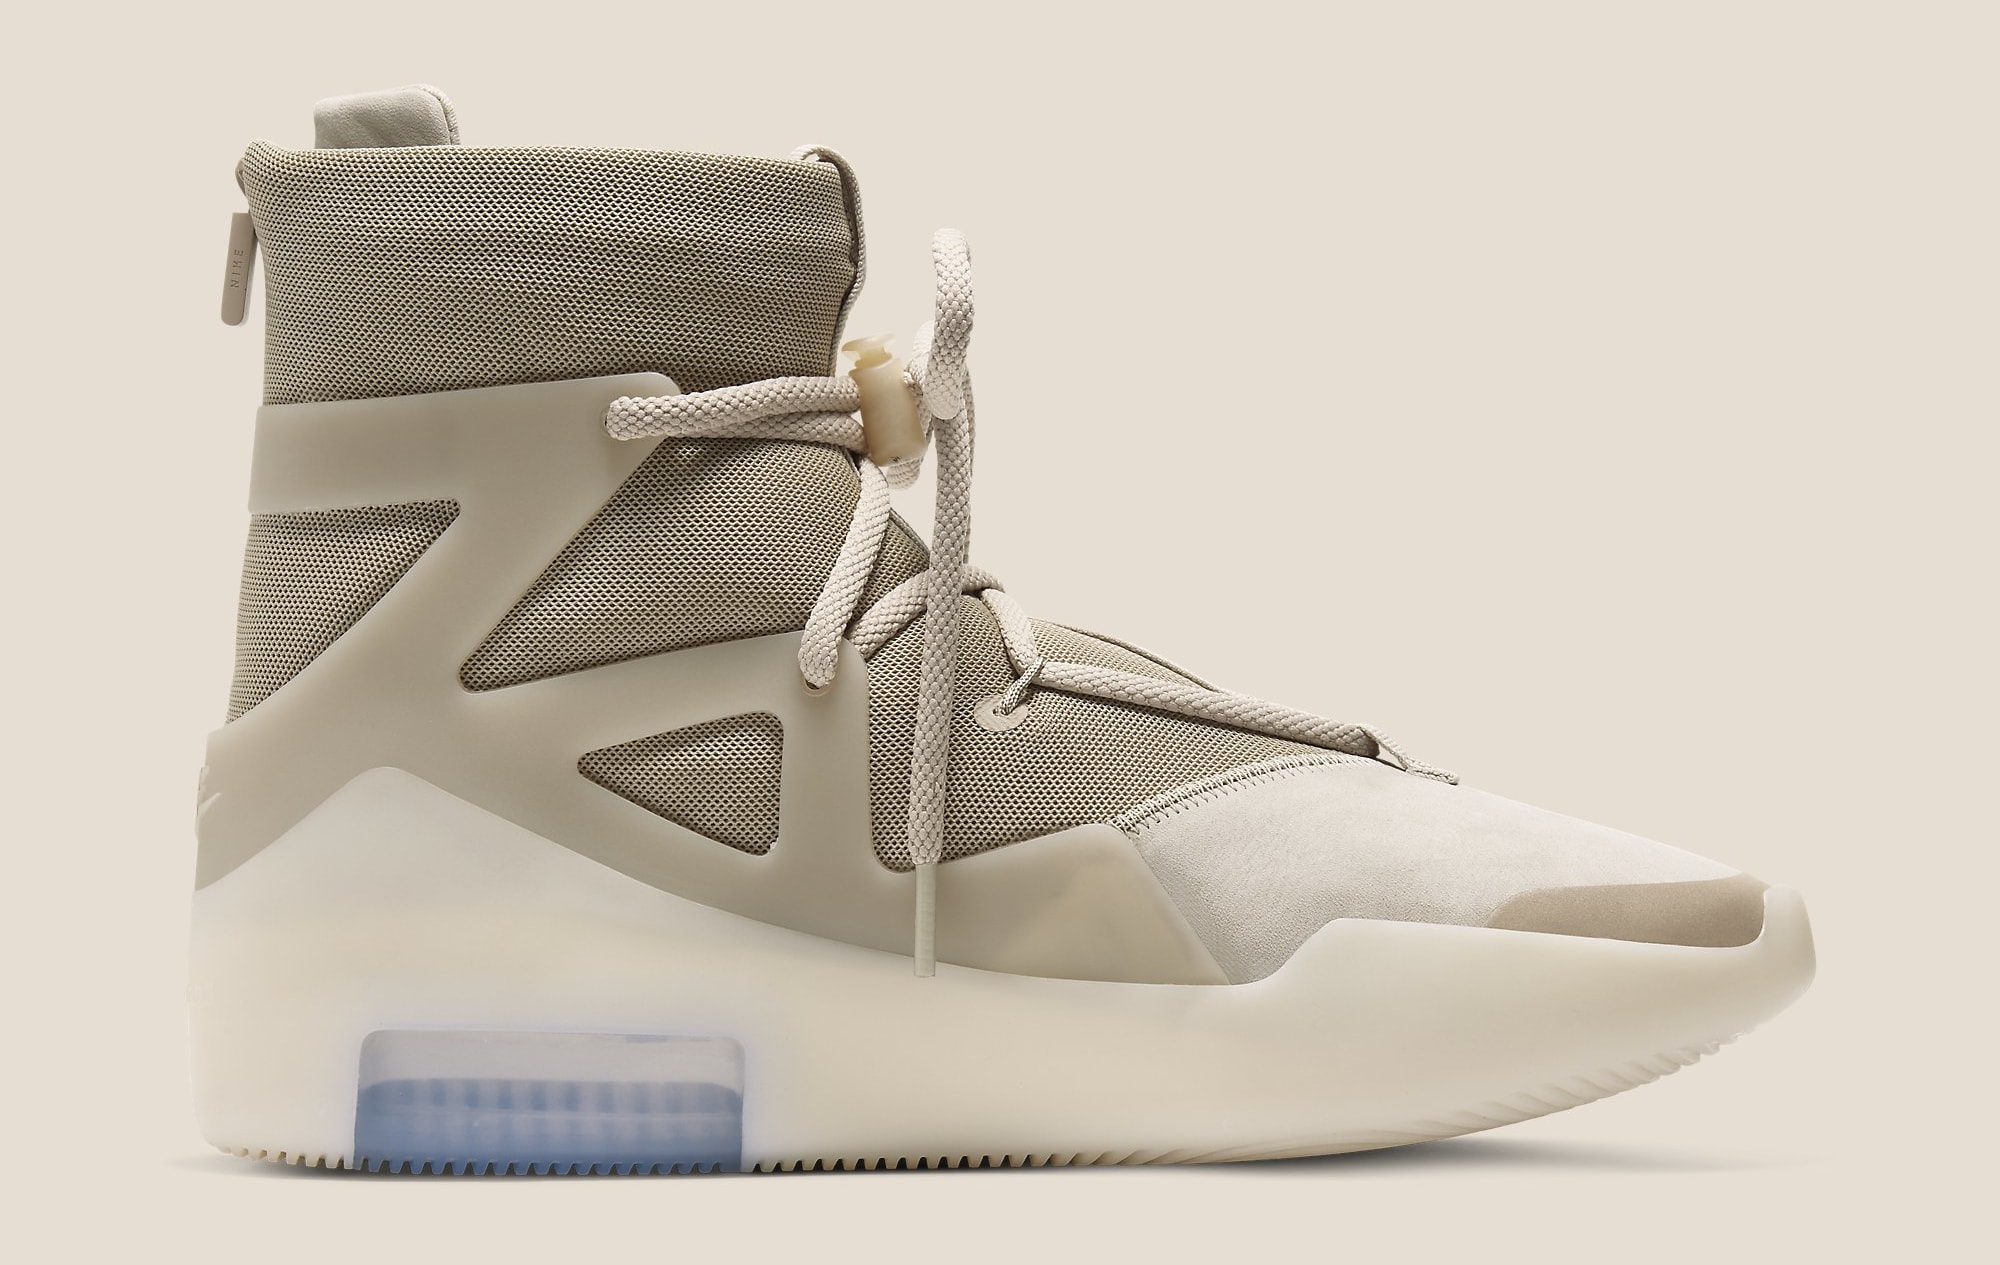 Best Look Yet at the 'Oatmeal' Nike Air Fear of God 1 | Complex